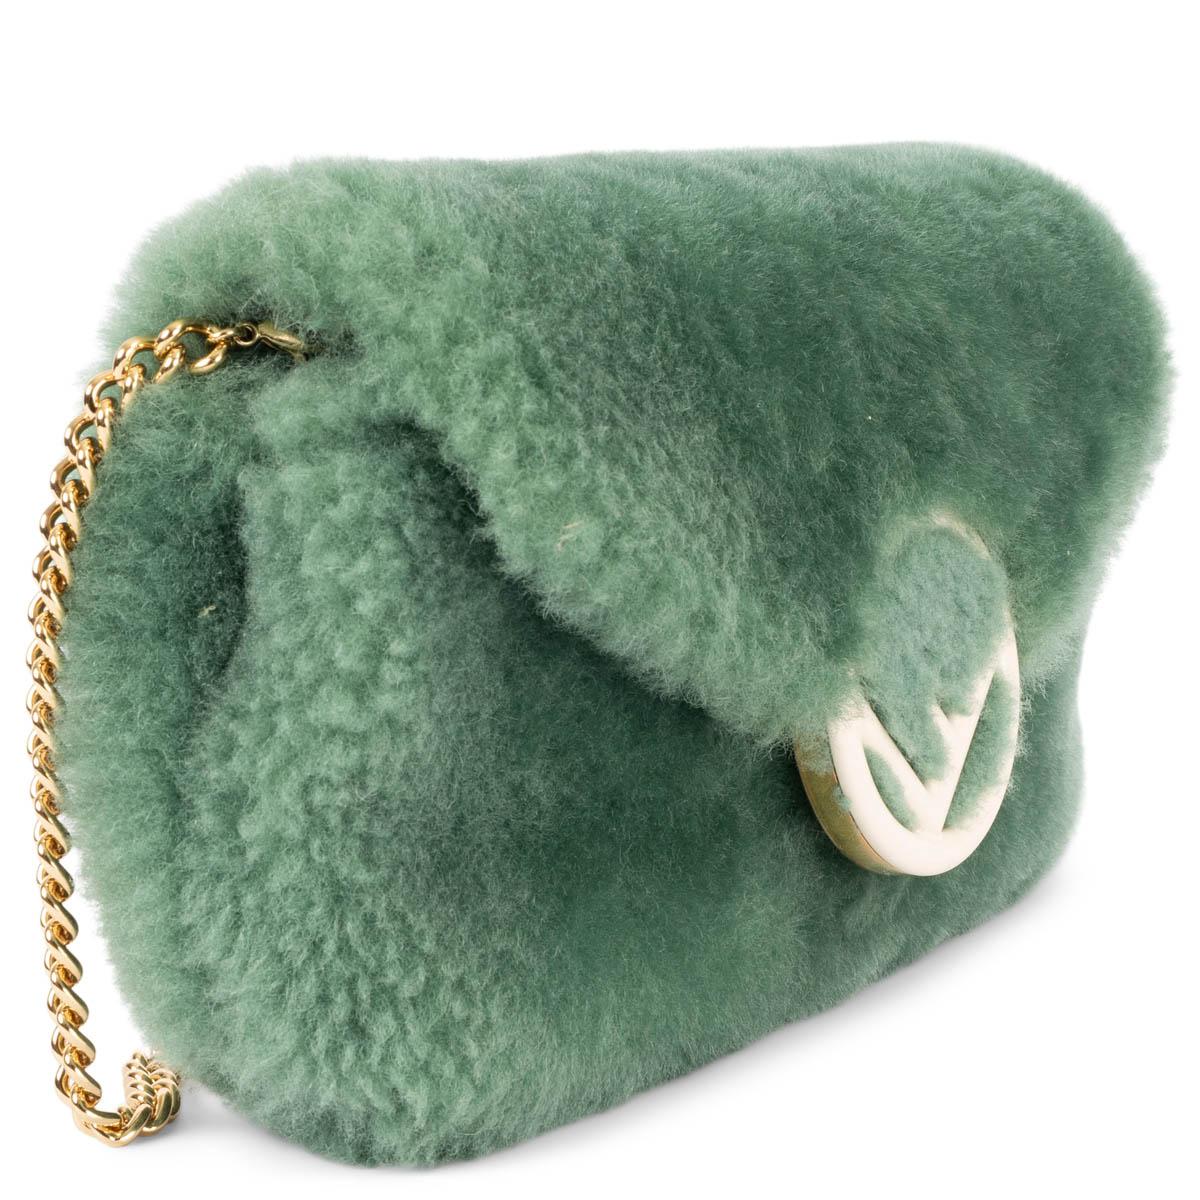 100% authentic Fendi logo belt & crossbody bag in mint green shearling. The design features a detachable gold-tone metal chain link shoulder-strap and a detachable leather belt bag strap. Lined in mint green canvas with two leather credit card